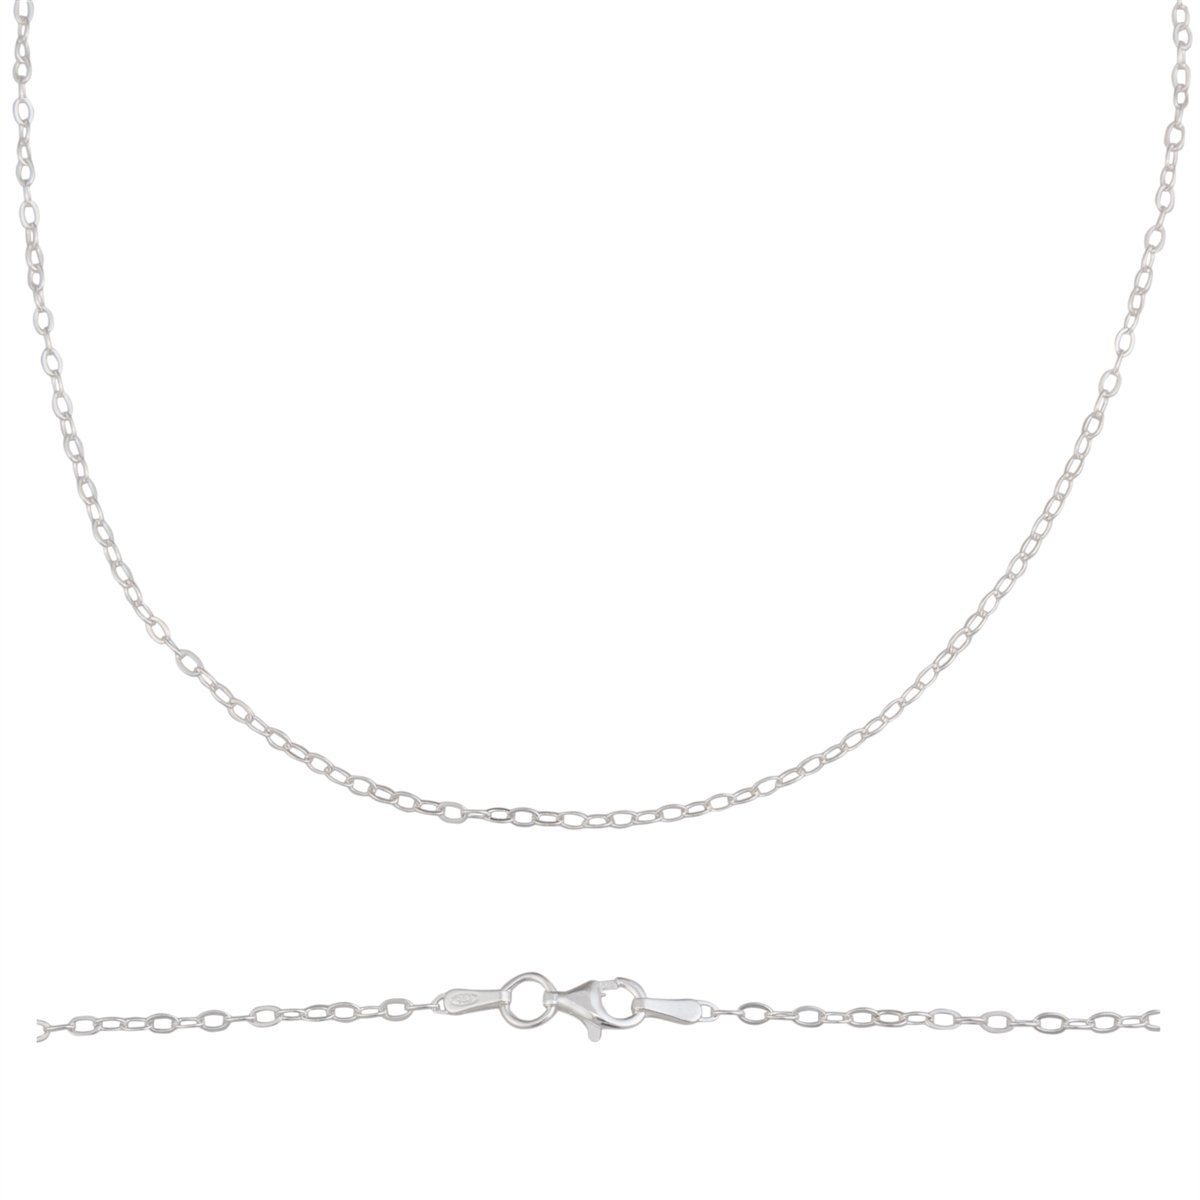 Sterling Silver Thin Drop Oval Link Chain | Charles Albert Jewelry